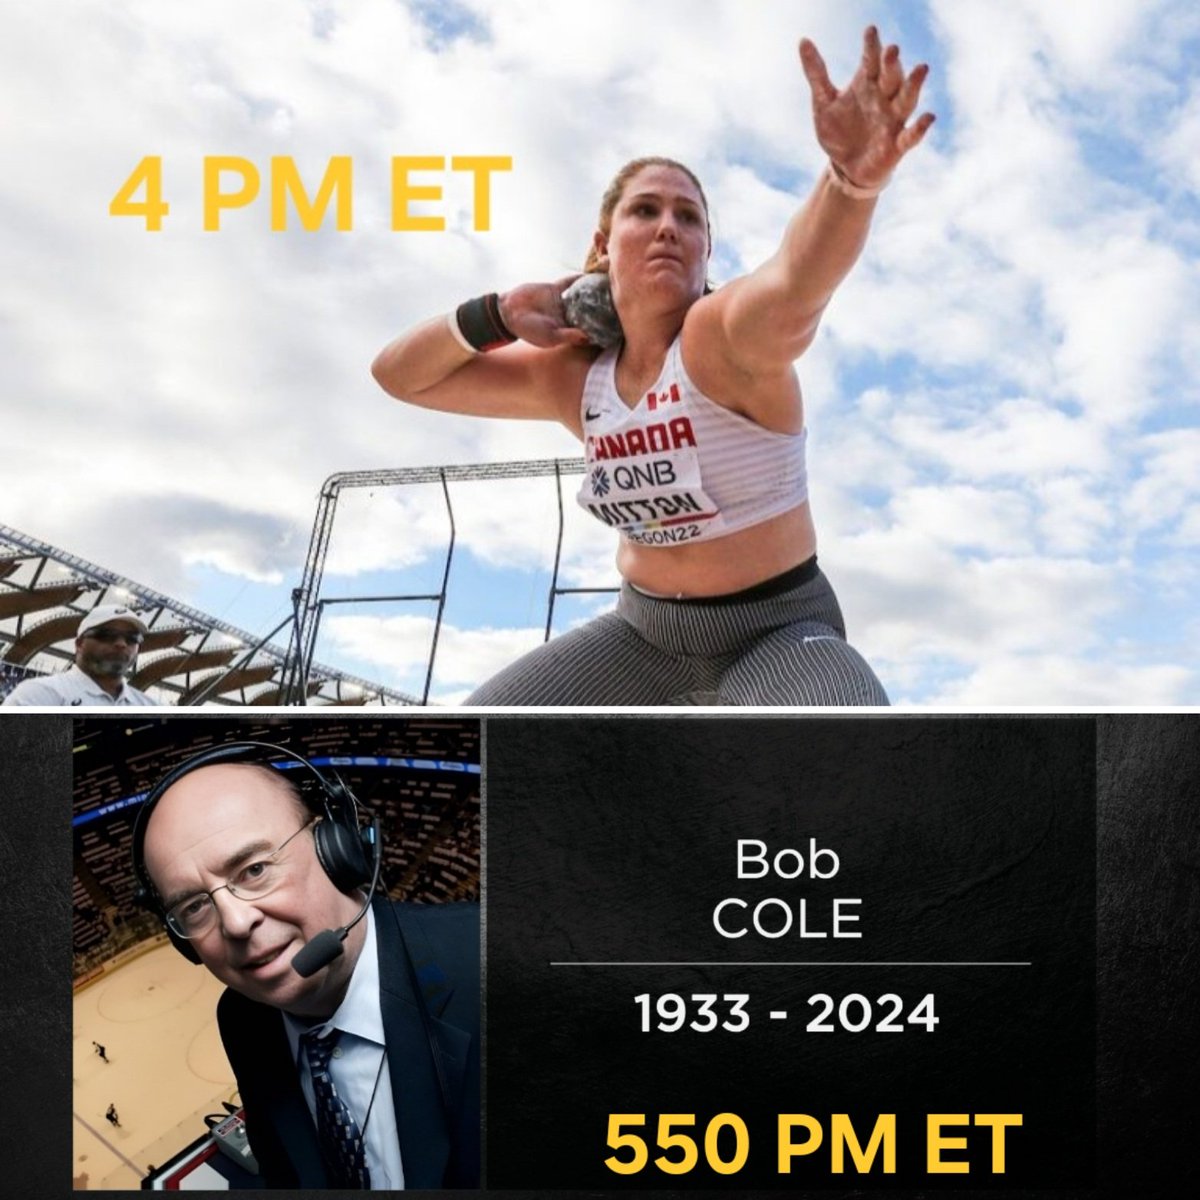 CBC Sports Presents TODAY Diamond League Athletics with 🇨🇦 Shot Put star Sarah Mitton 4pm ET and our tribute to the 'Voice of Hockey' Bob Cole courtesy @b0undless Approx 550 pm ET @cbc @cbcsports @CBCOlympics @AthletesCAN @TeamCanada @hockeynight @HockeyCanada